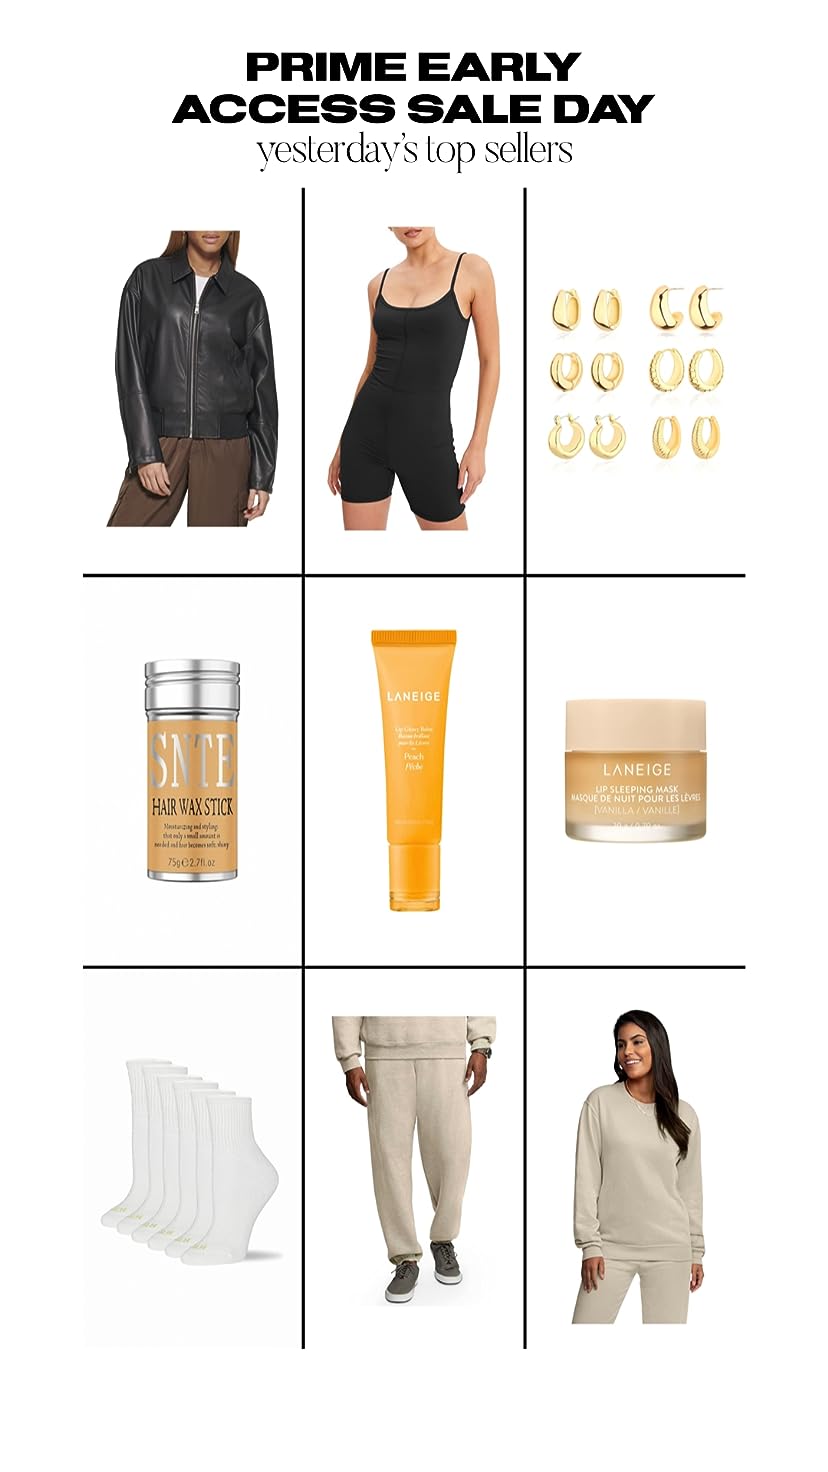 Prime Early Access Sale: Yesterday&#39;s top sellers! I wear size small in the romper &amp; sweatsuit &amp; a large in the leather jacket for an oversized fit! #FoundItOnAmazon